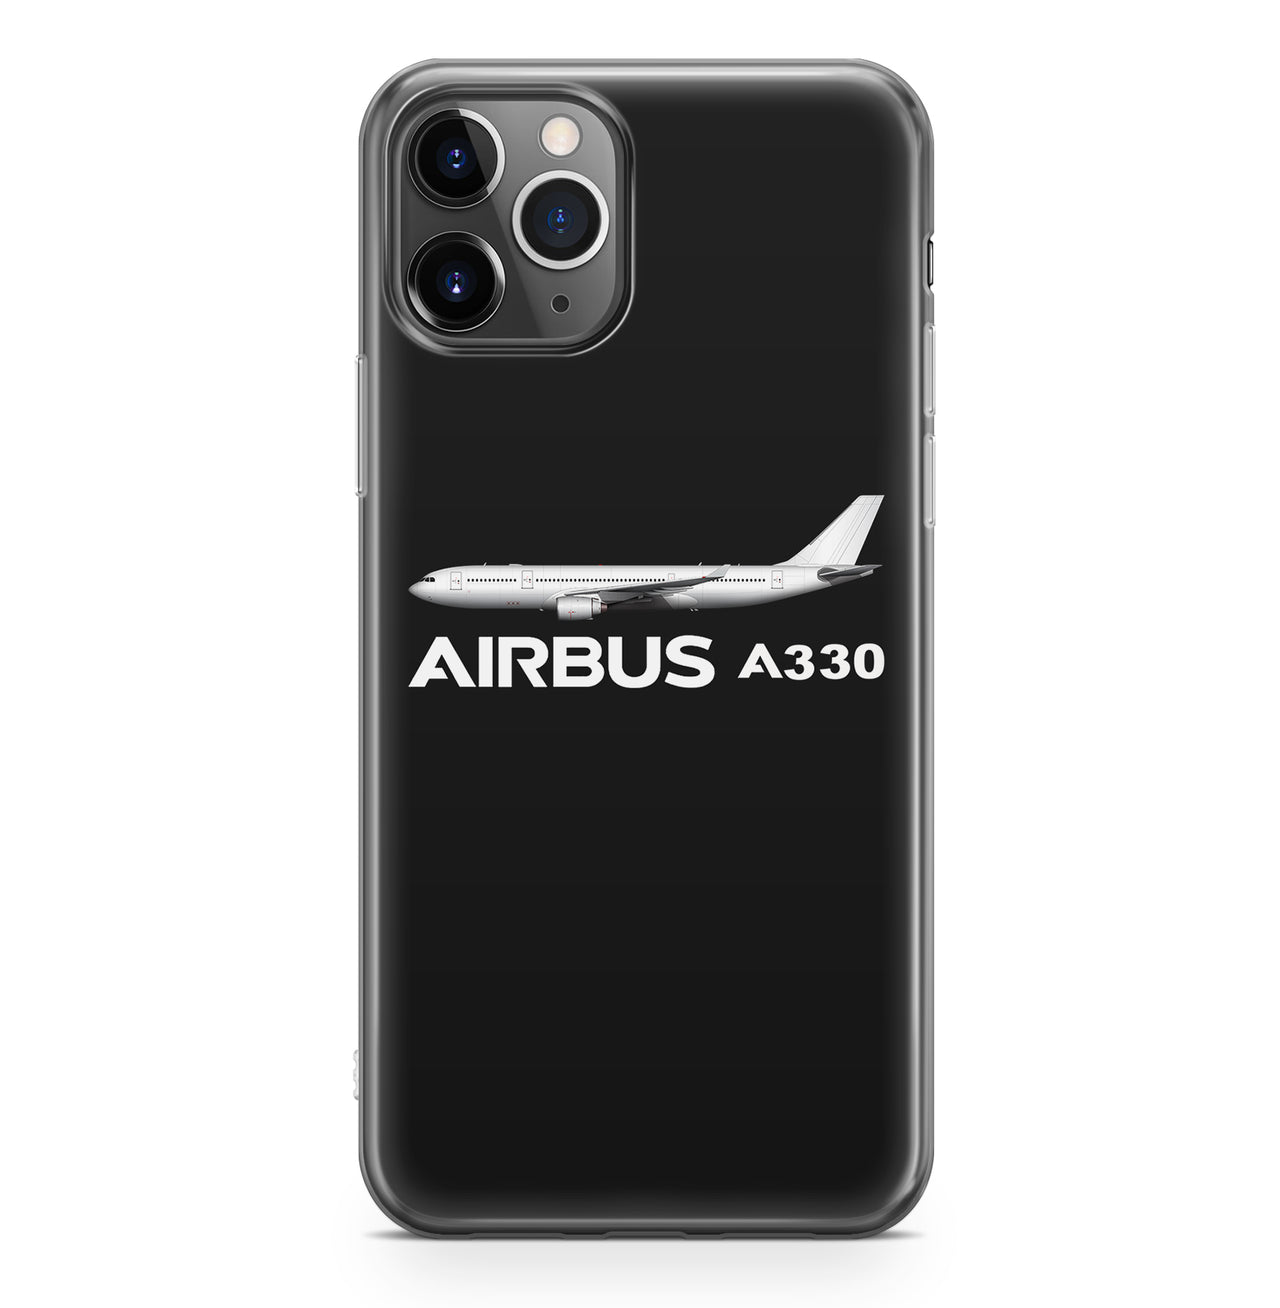 The Airbus A330 Designed iPhone Cases